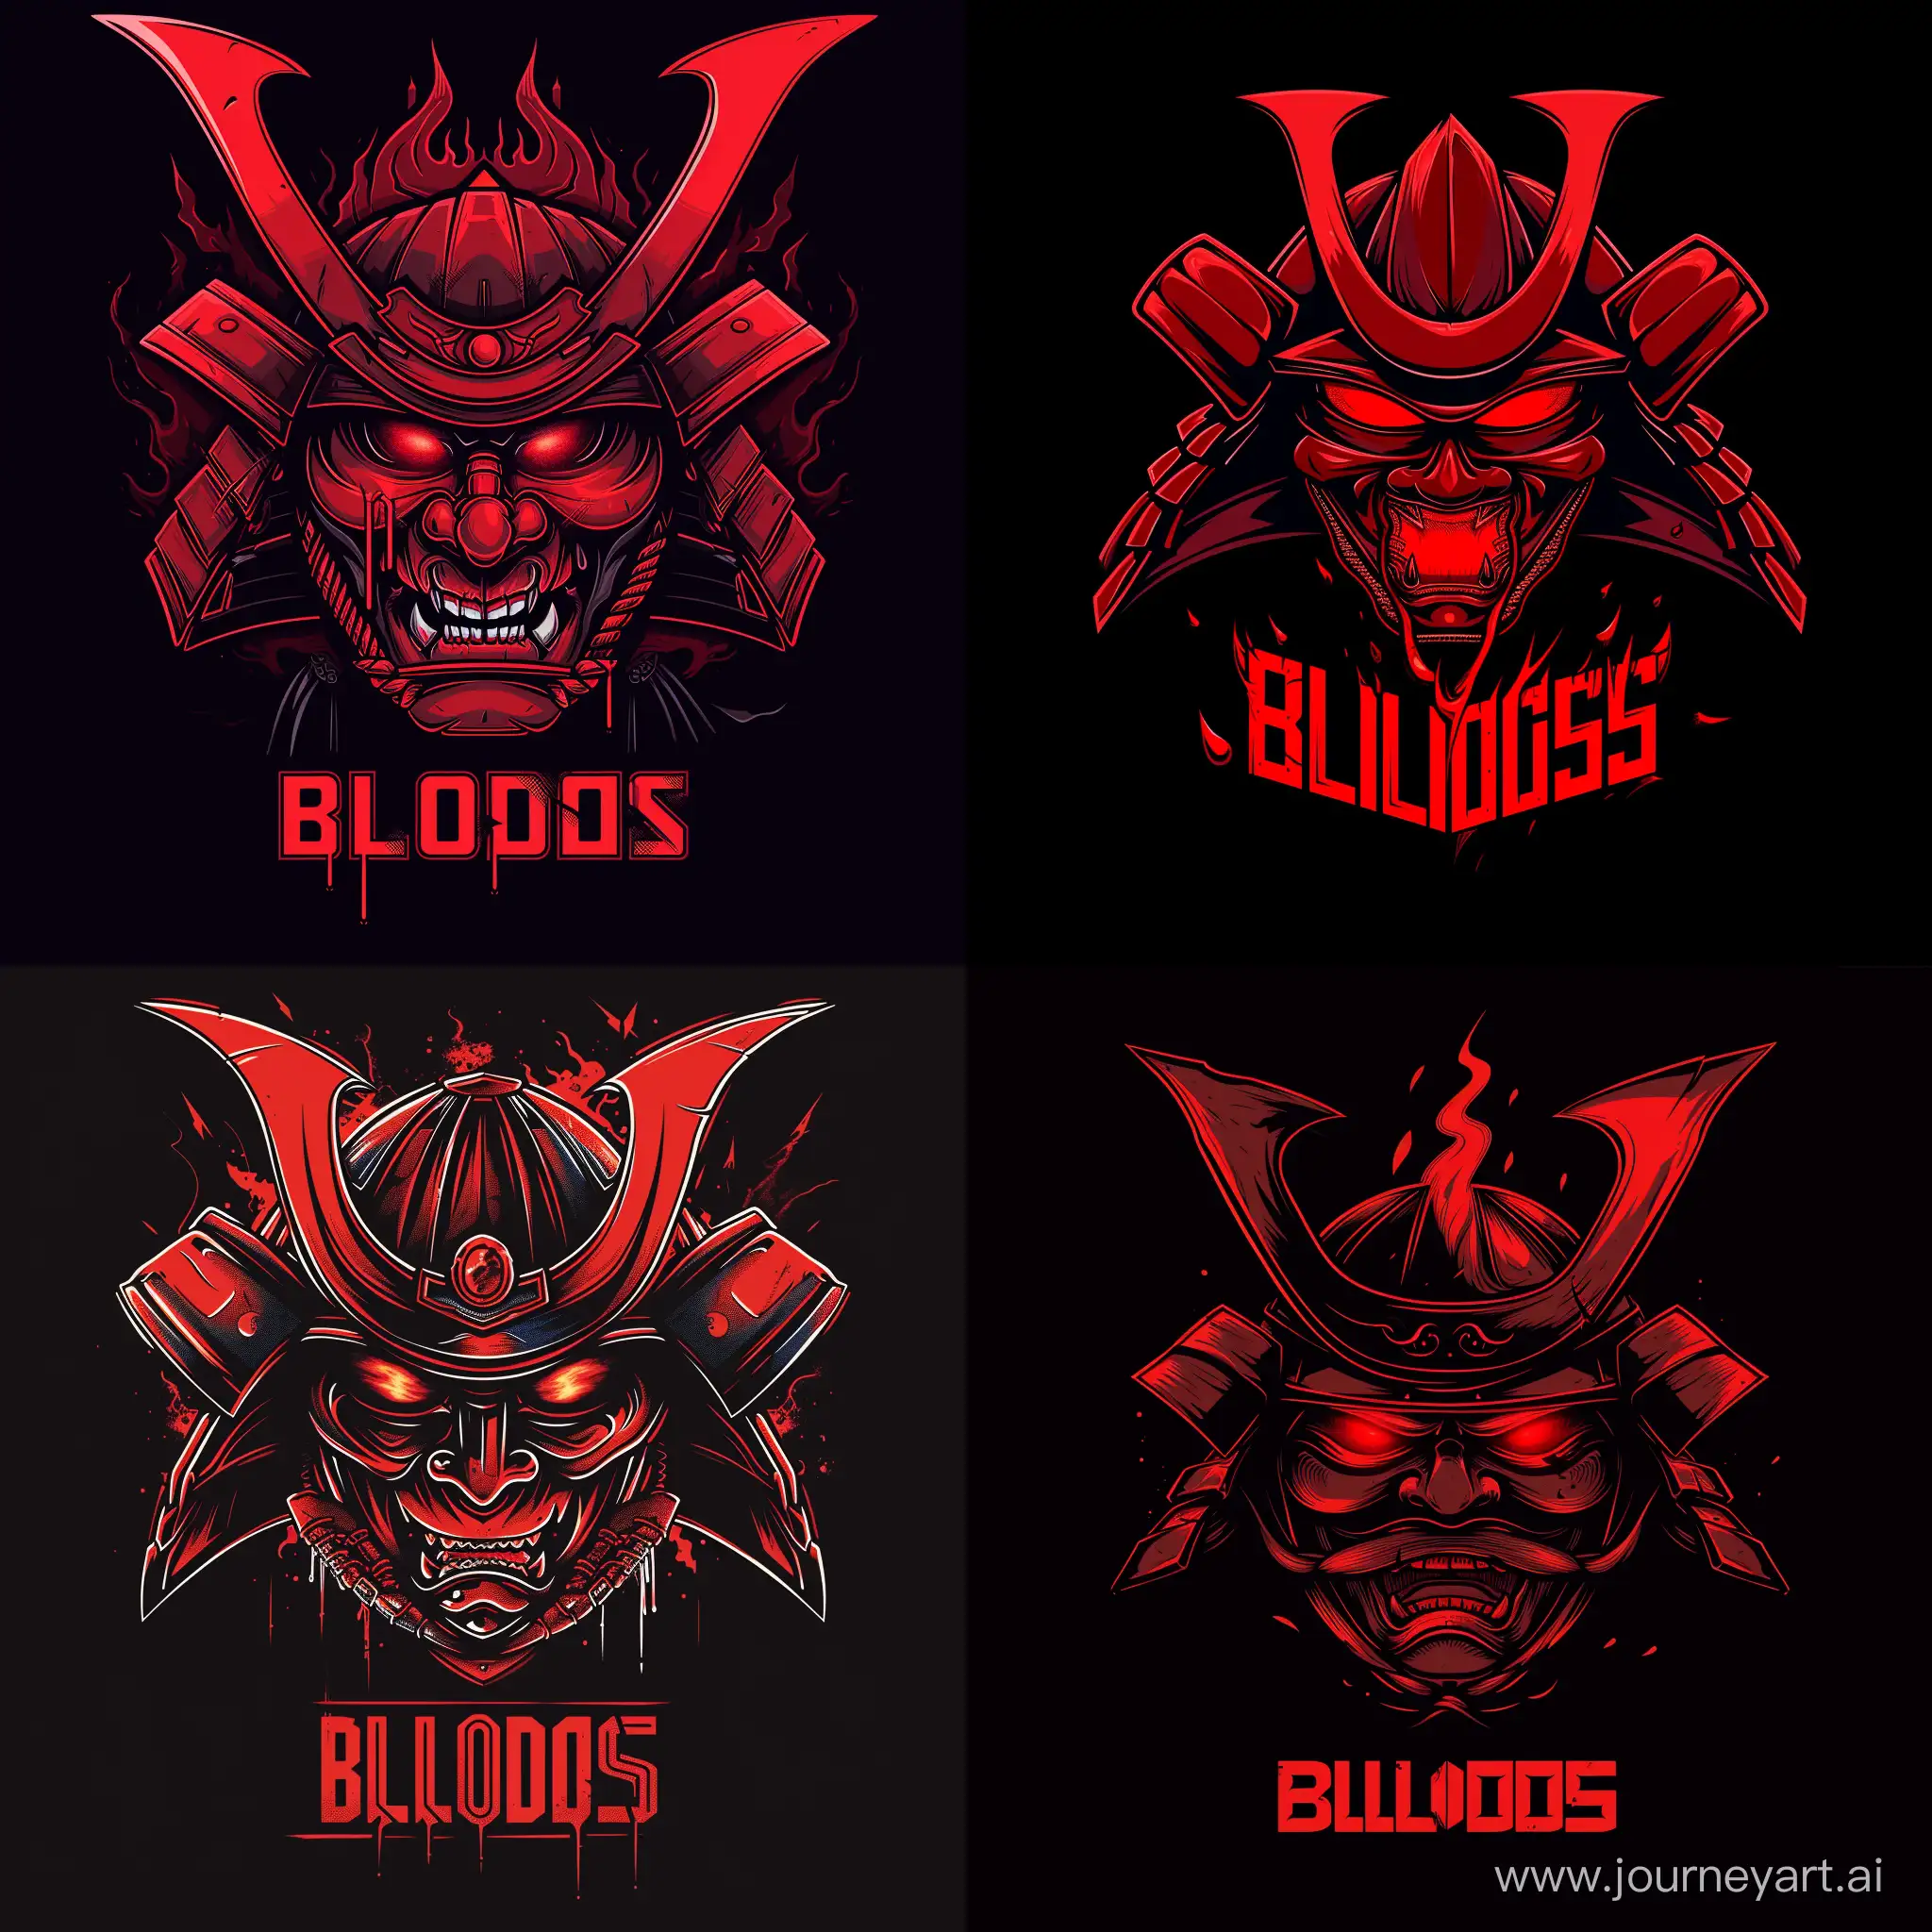 red cyber samurai head logo, red burning eyes, in down text "BLOODS"